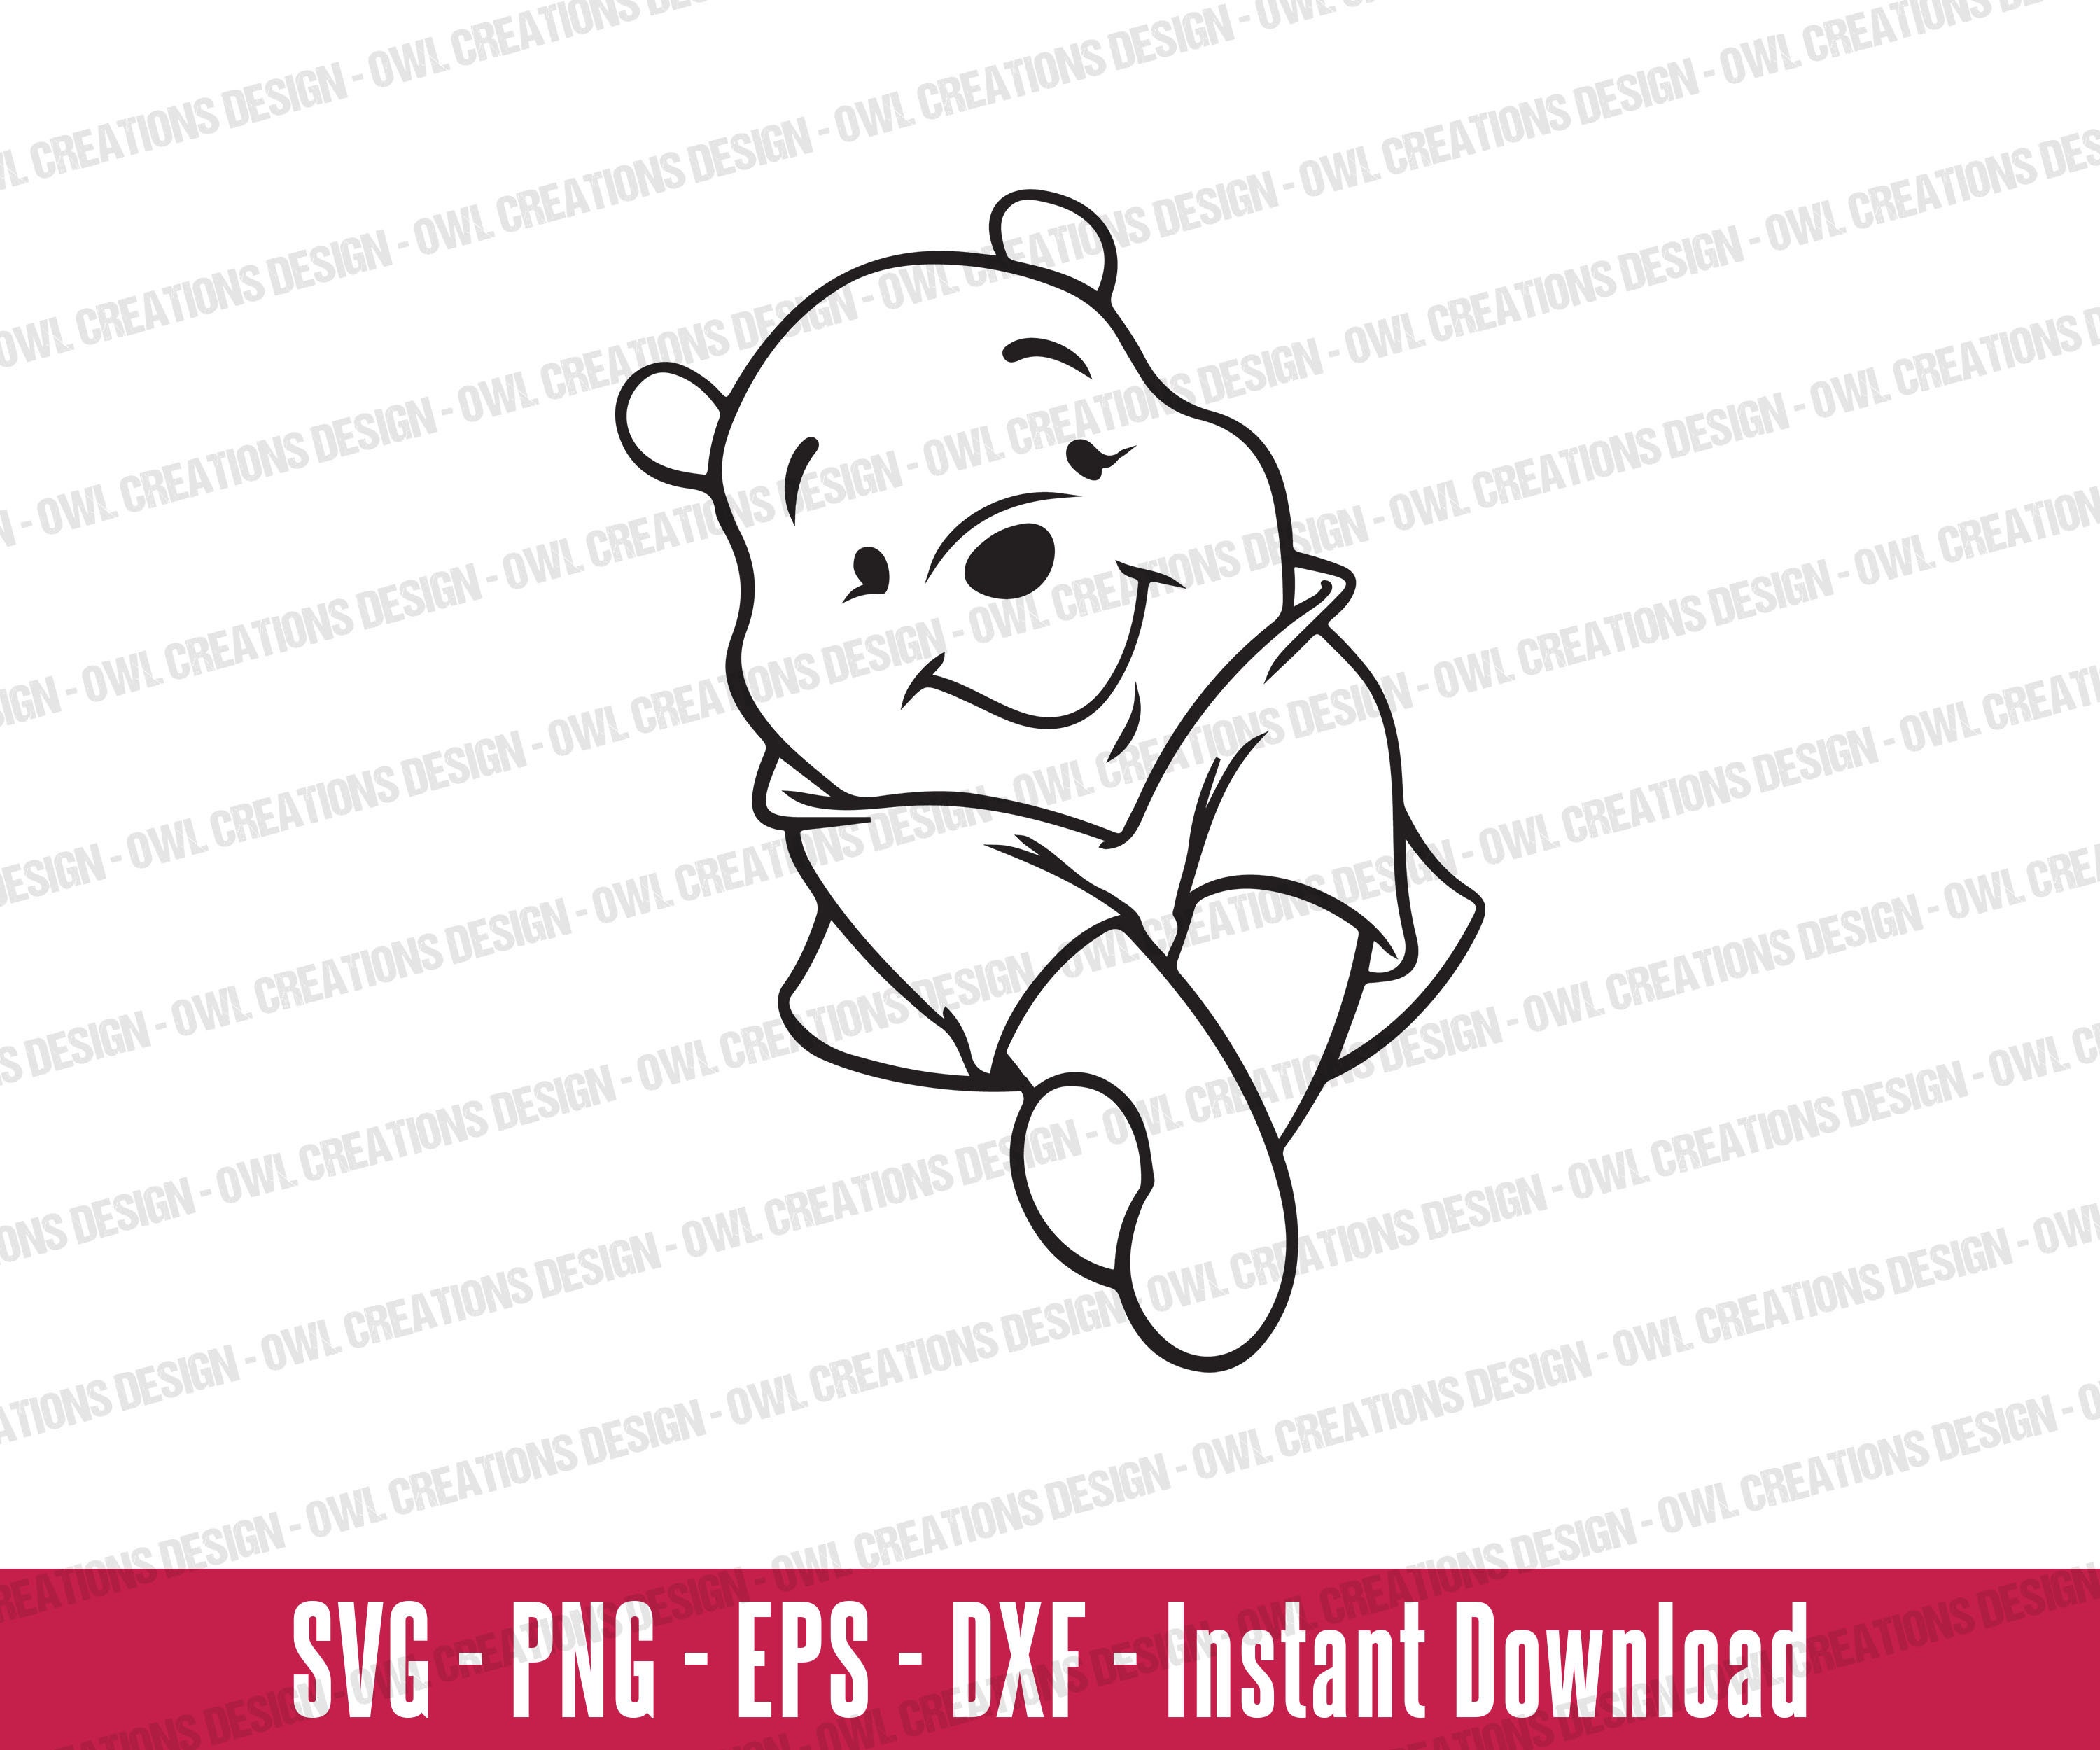 Winnie The Pooh Svg Png Eps Dxf Pooh The Bear Svg Svg Etsy